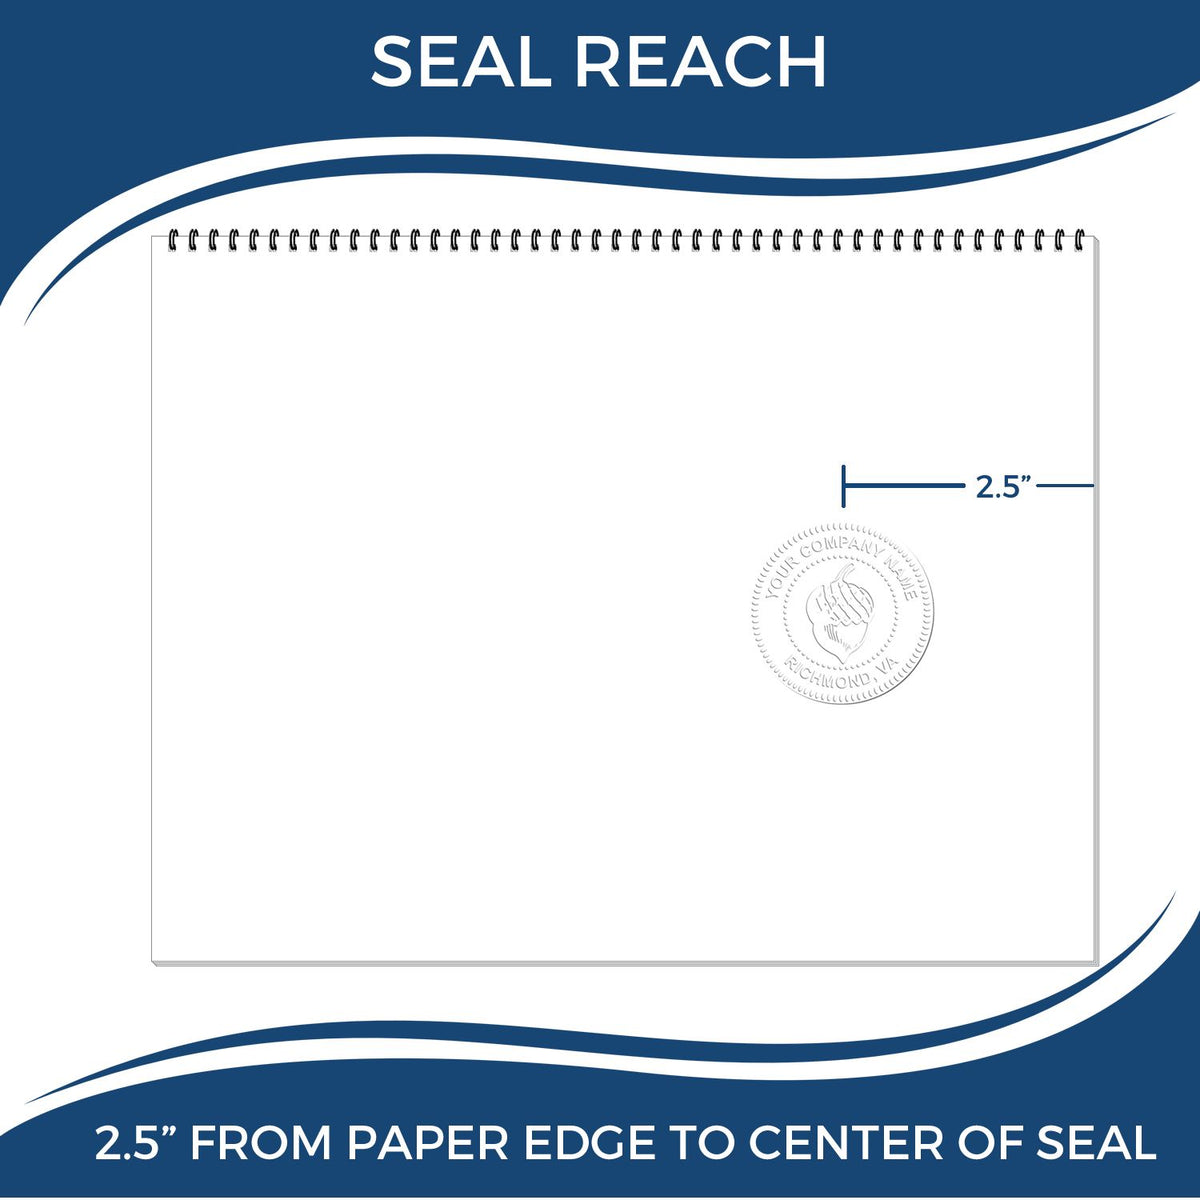 An infographic showing the seal reach which is represented by a ruler and a miniature seal image of the Heavy Duty Cast Iron North Dakota Geologist Seal Embosser